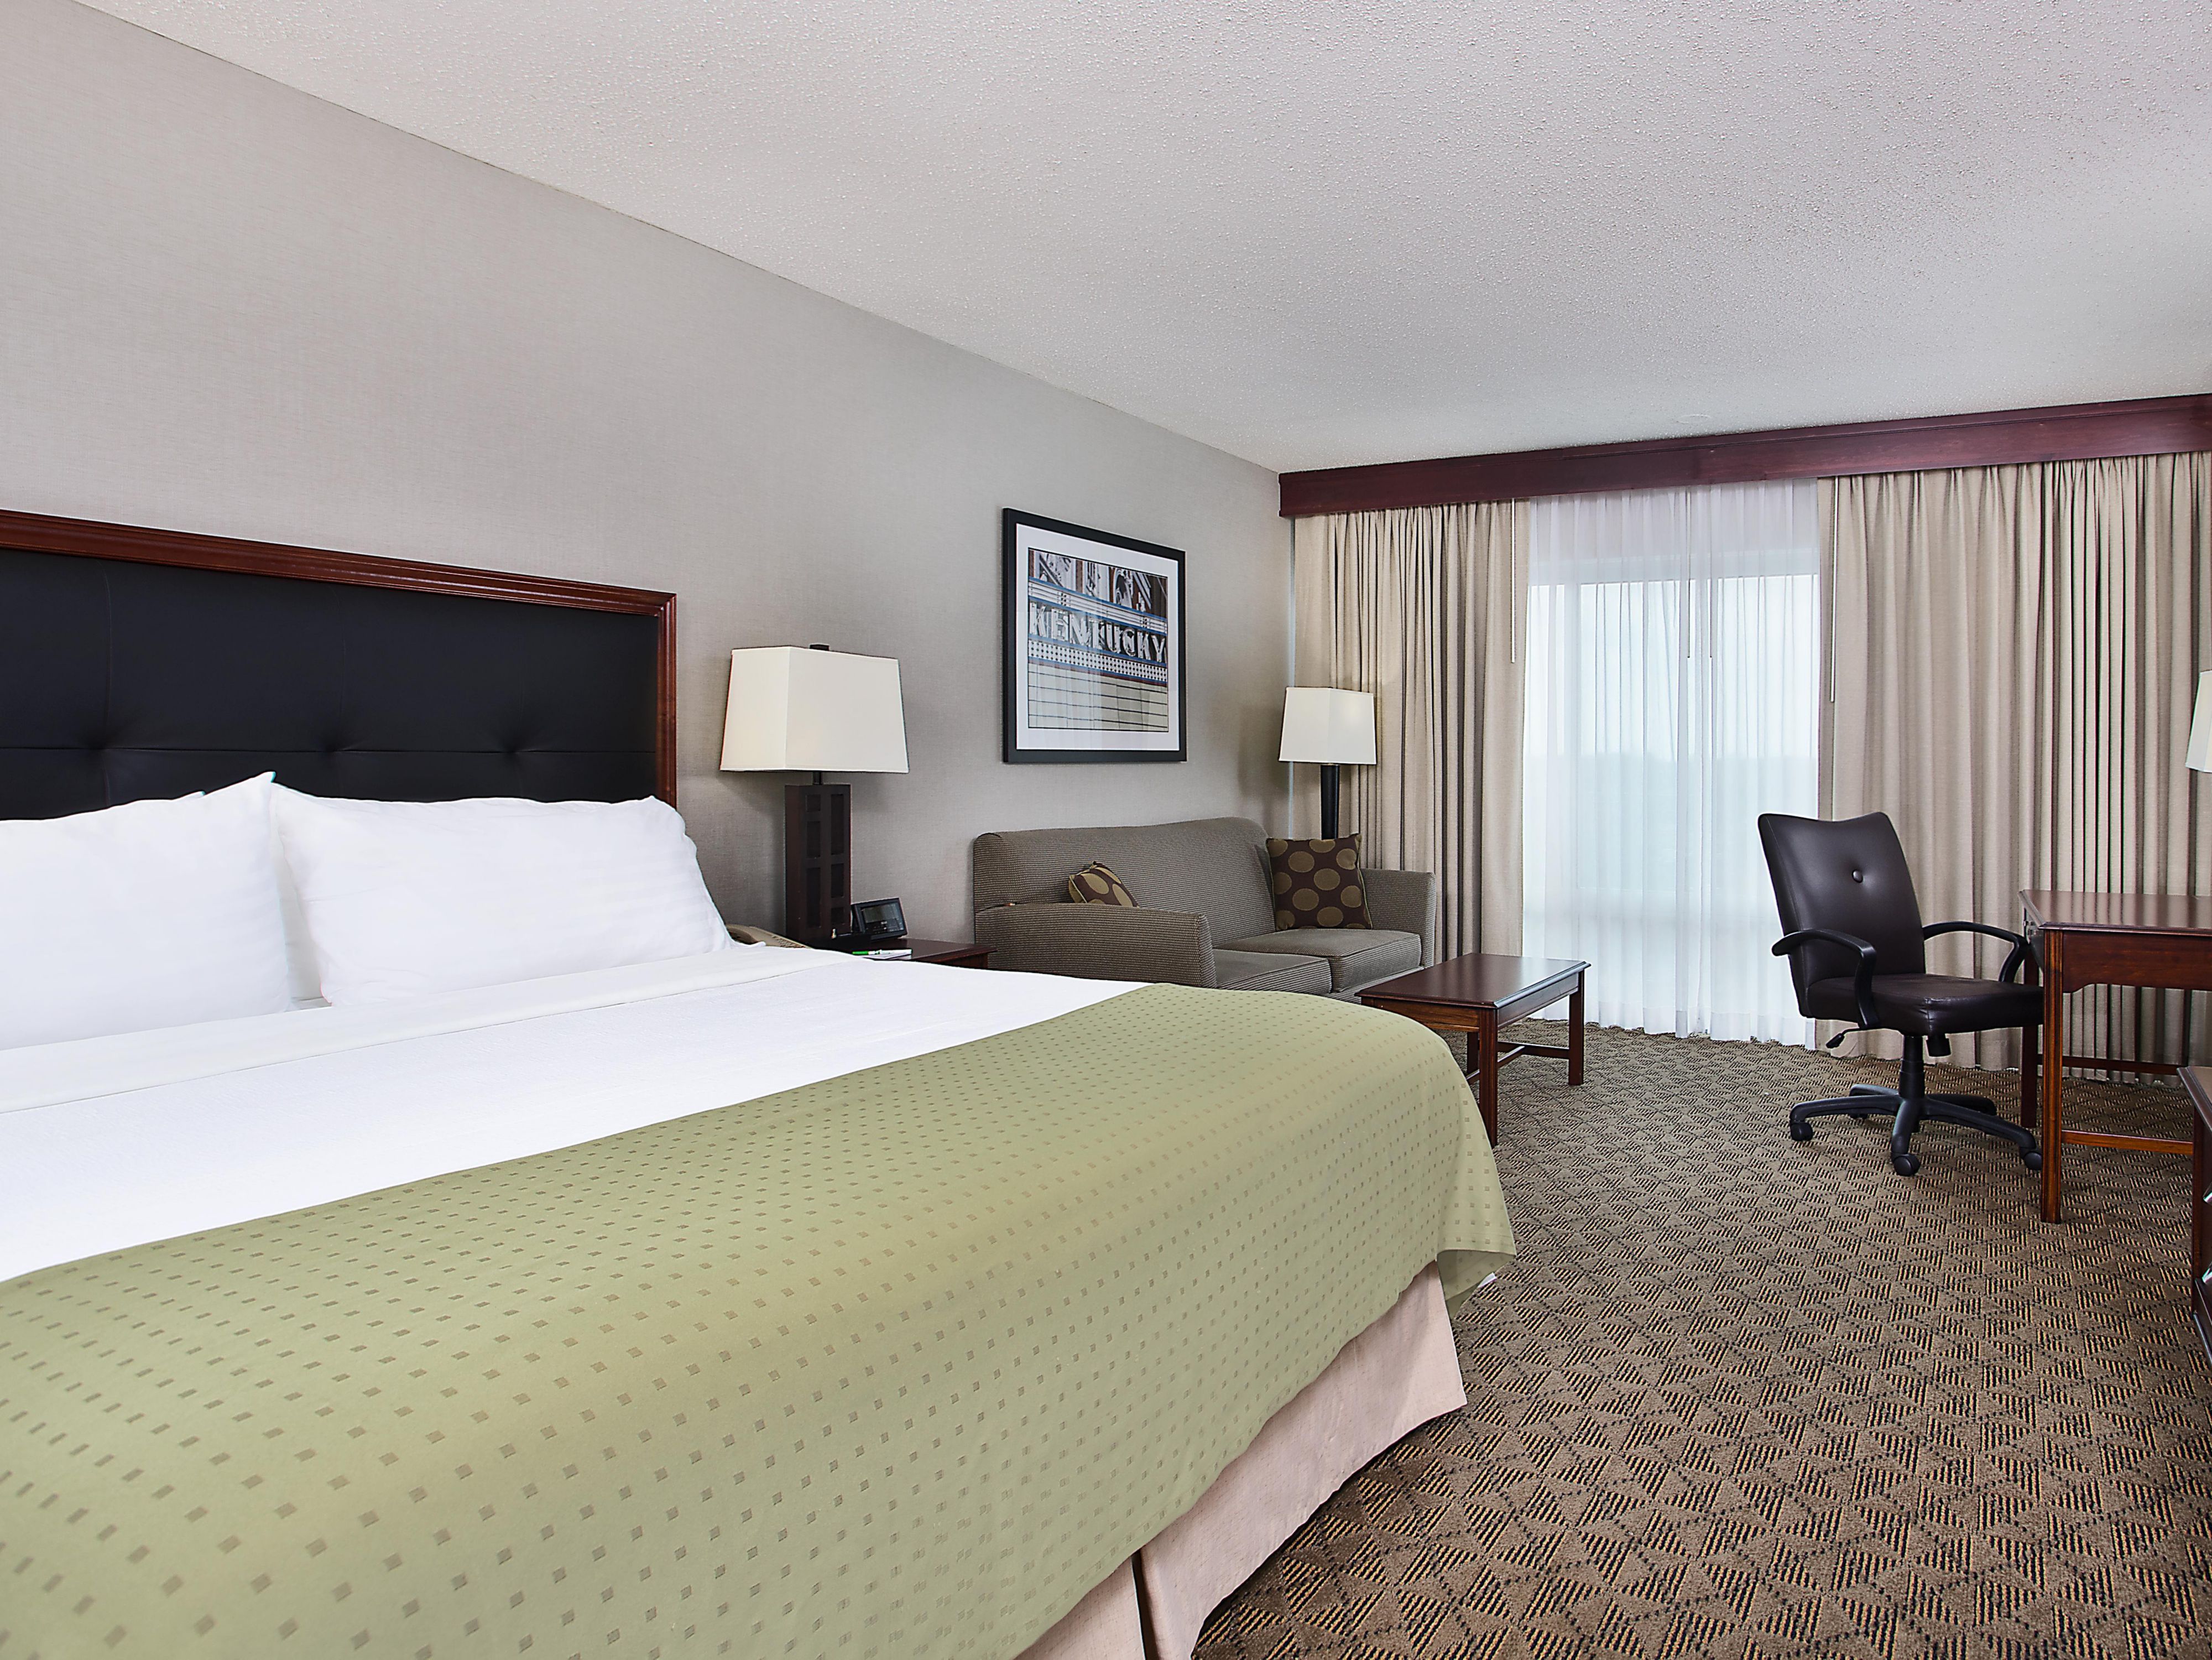 Relax in 218 spacious rooms and suites in Bowling Green. Opening to our atrium lobby and waterfall, our rooms offer premium beds, free Wi-Fi, a spacious workspace, mini fridge, microwave, and a wet bar. Indulge in our one-bedroom suites with living and dining areas.